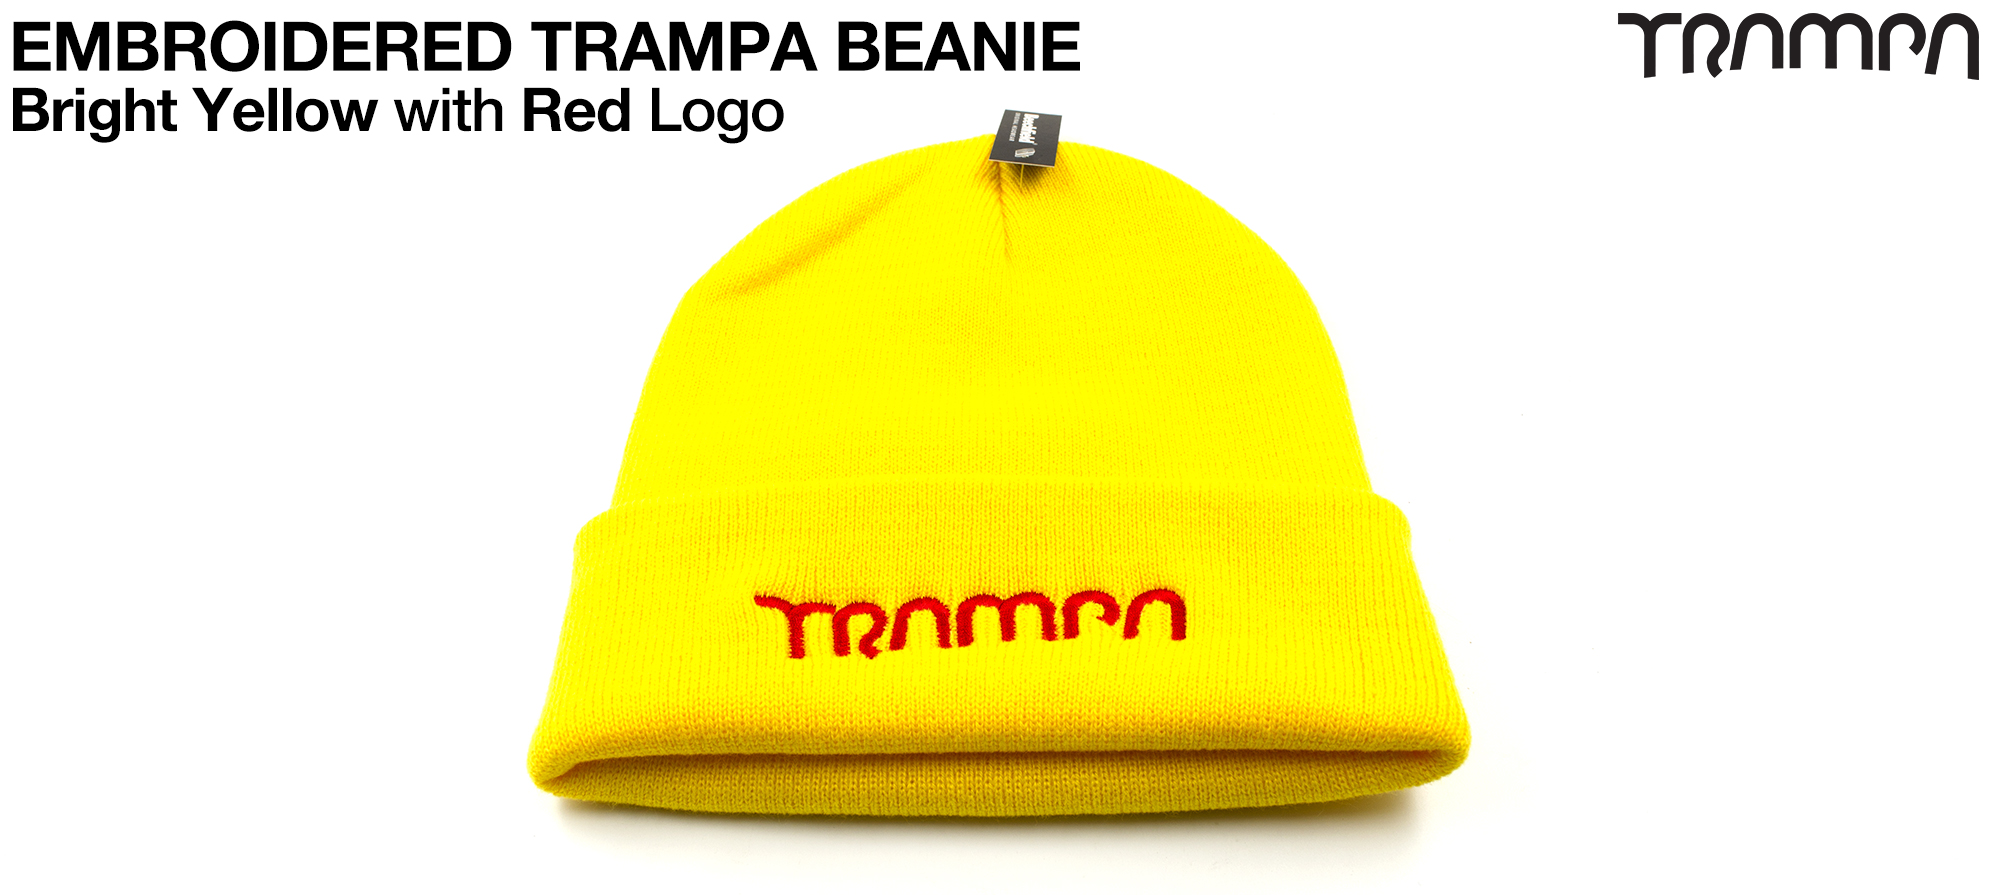 Bright YELLOW Woolly hat with Electric RED Embroidered TRAMPA logo - Double thick turn over for extra warmth